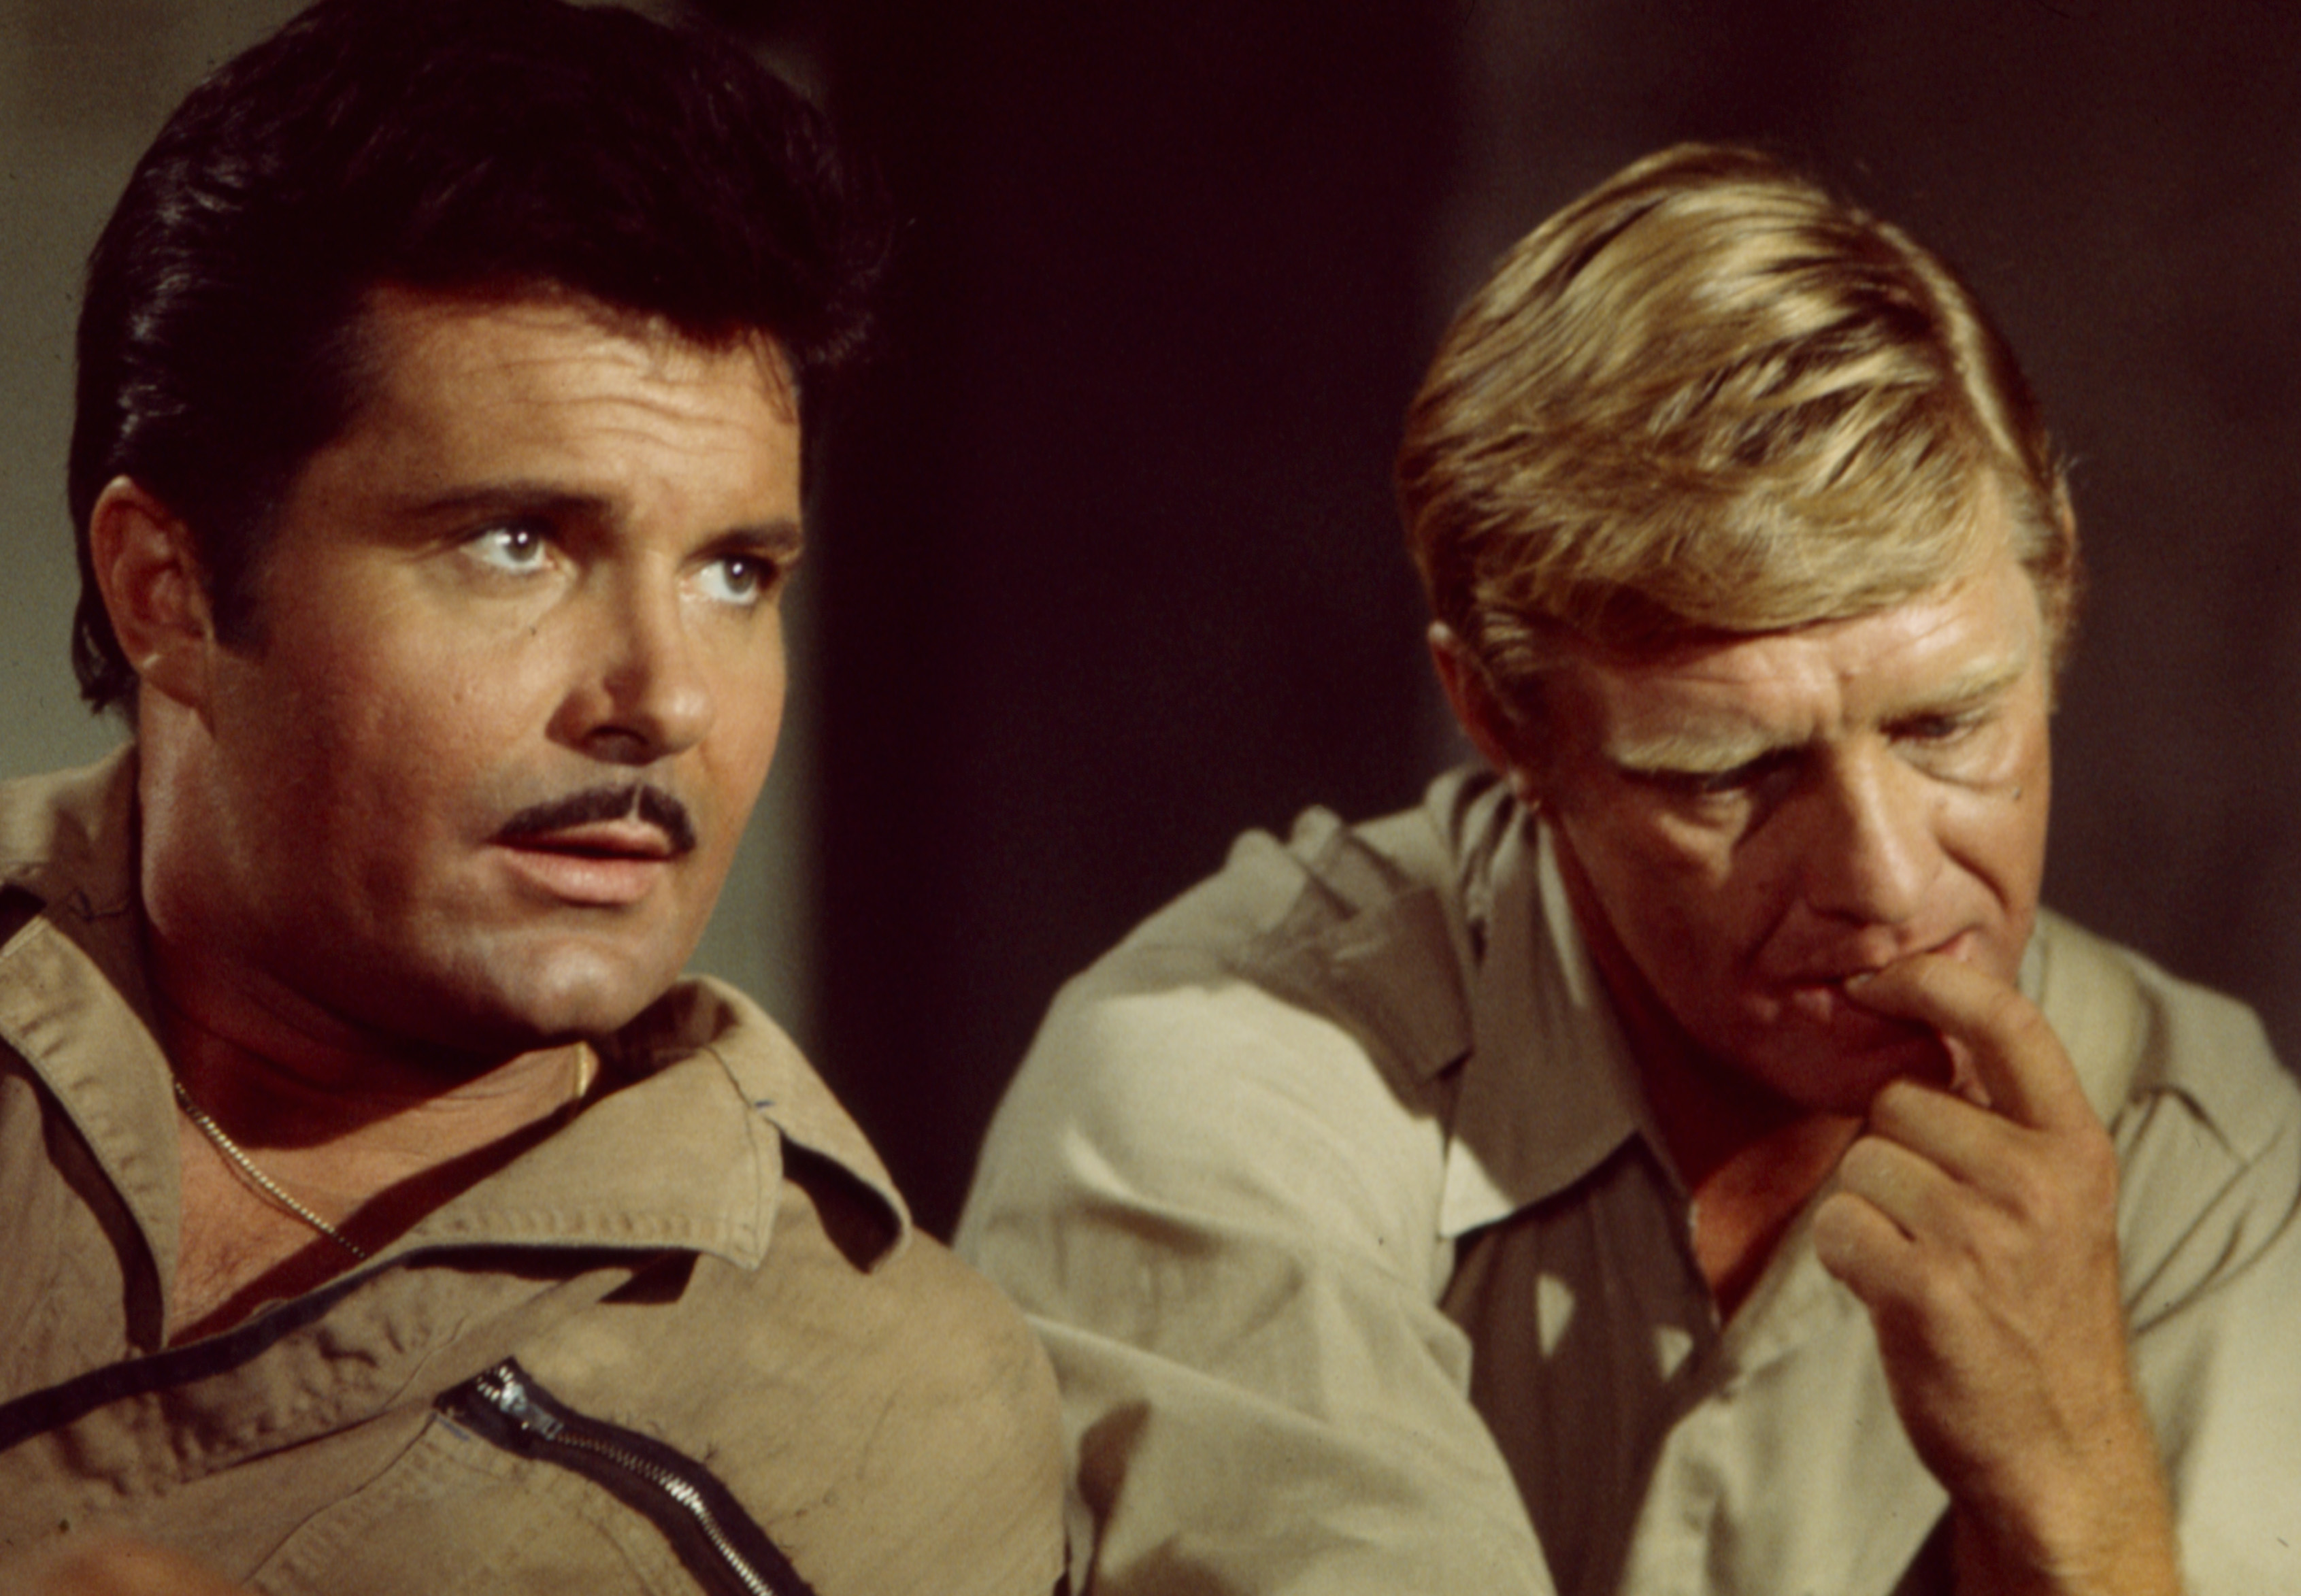 Max Baer Jr. and Don Knight starring in "The Birdmen" in 1971 | Source: Getty Images